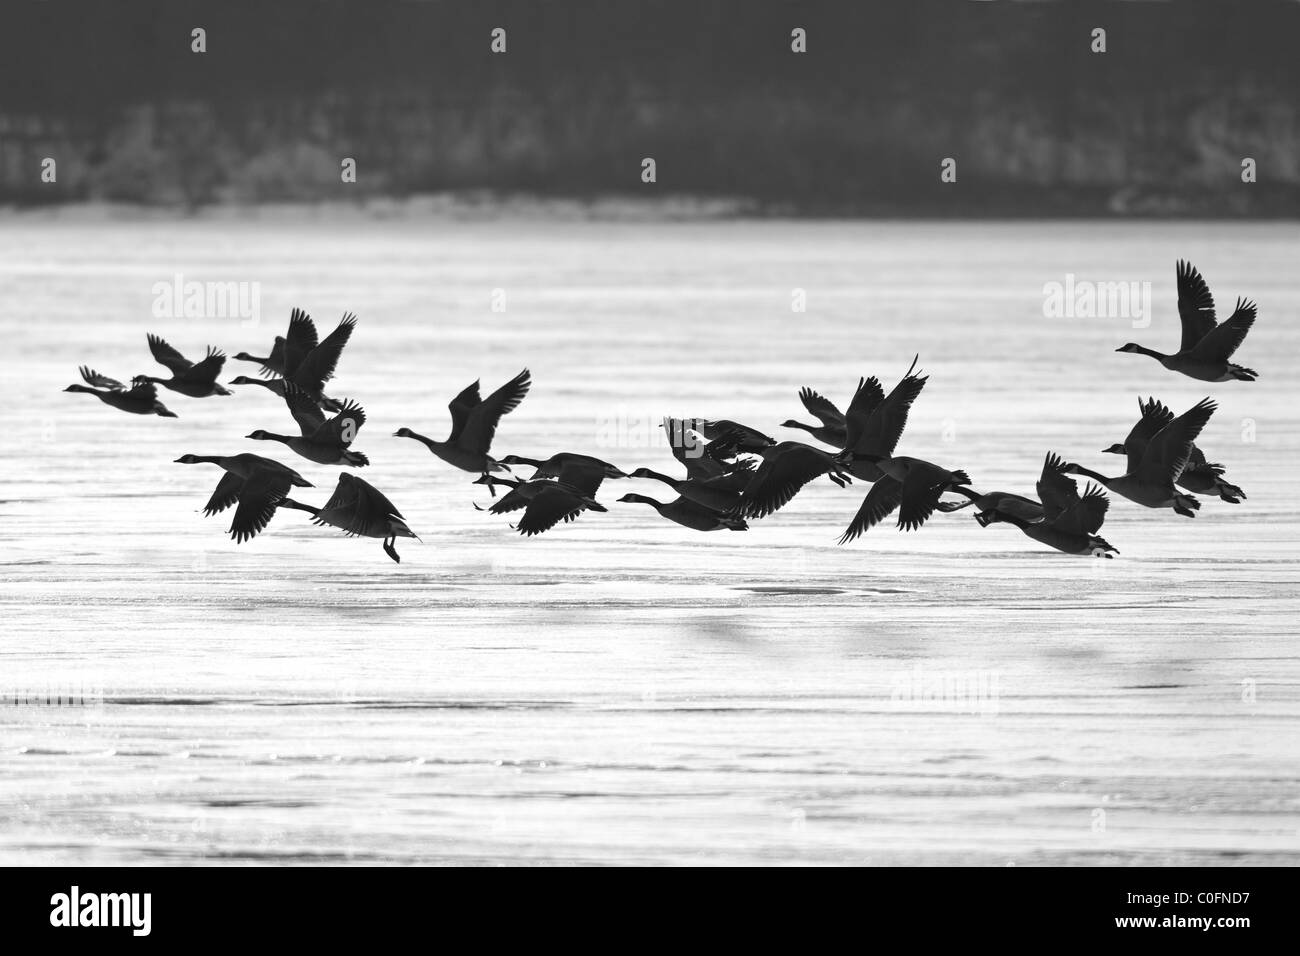 Canada Geese Take Flight Over Frozen Lake Stock Photo